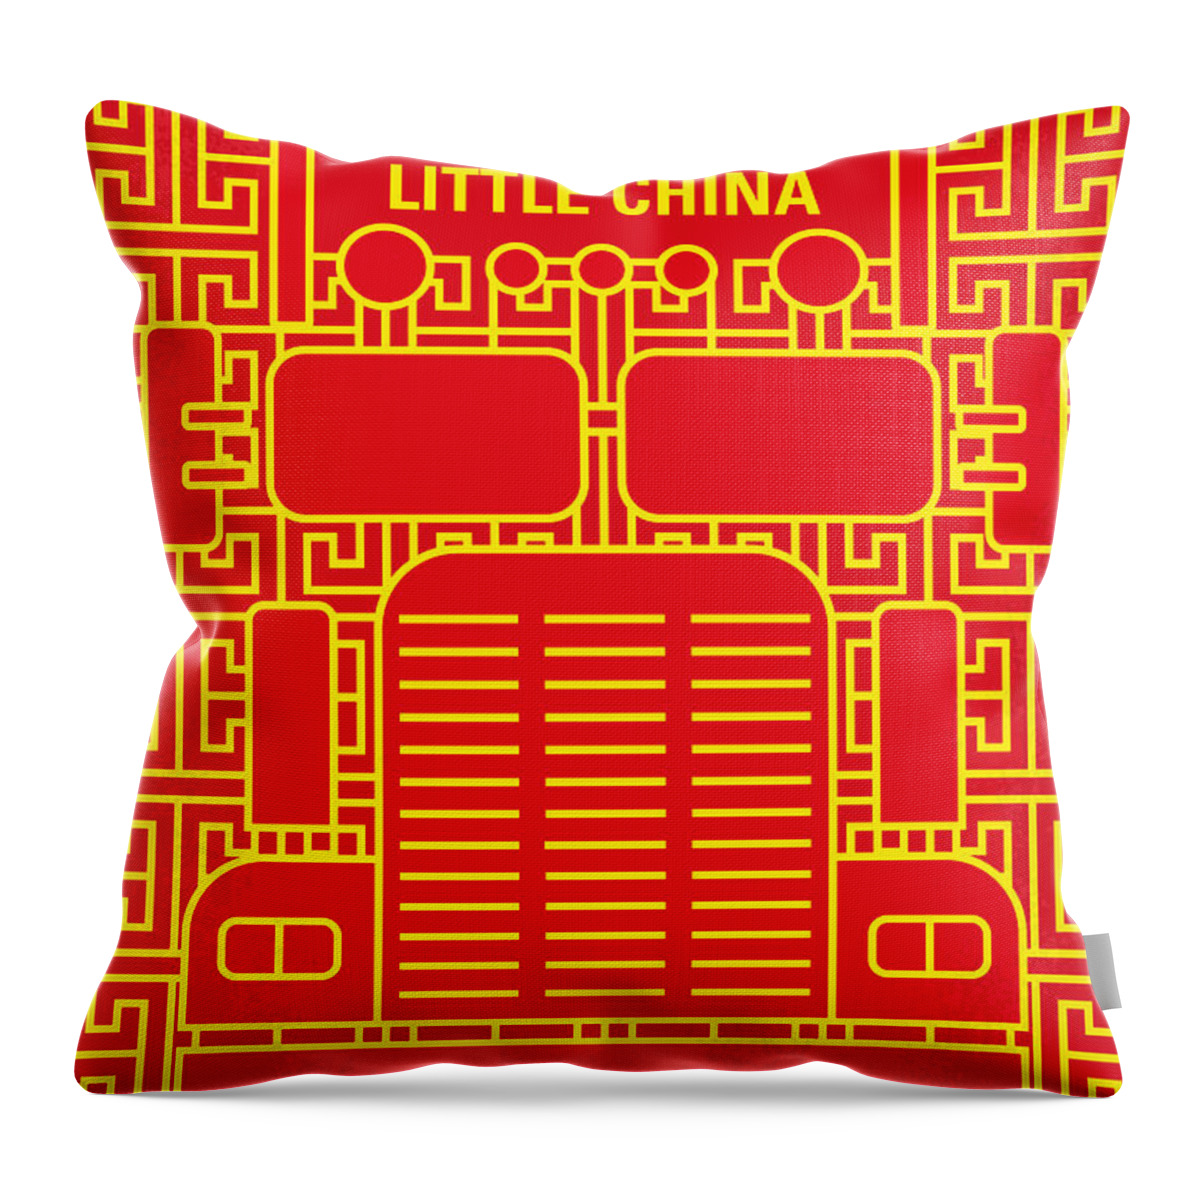 Big Trouble In Little China Throw Pillow featuring the digital art No515 My Big Trouble in Little China minimal movie poster by Chungkong Art